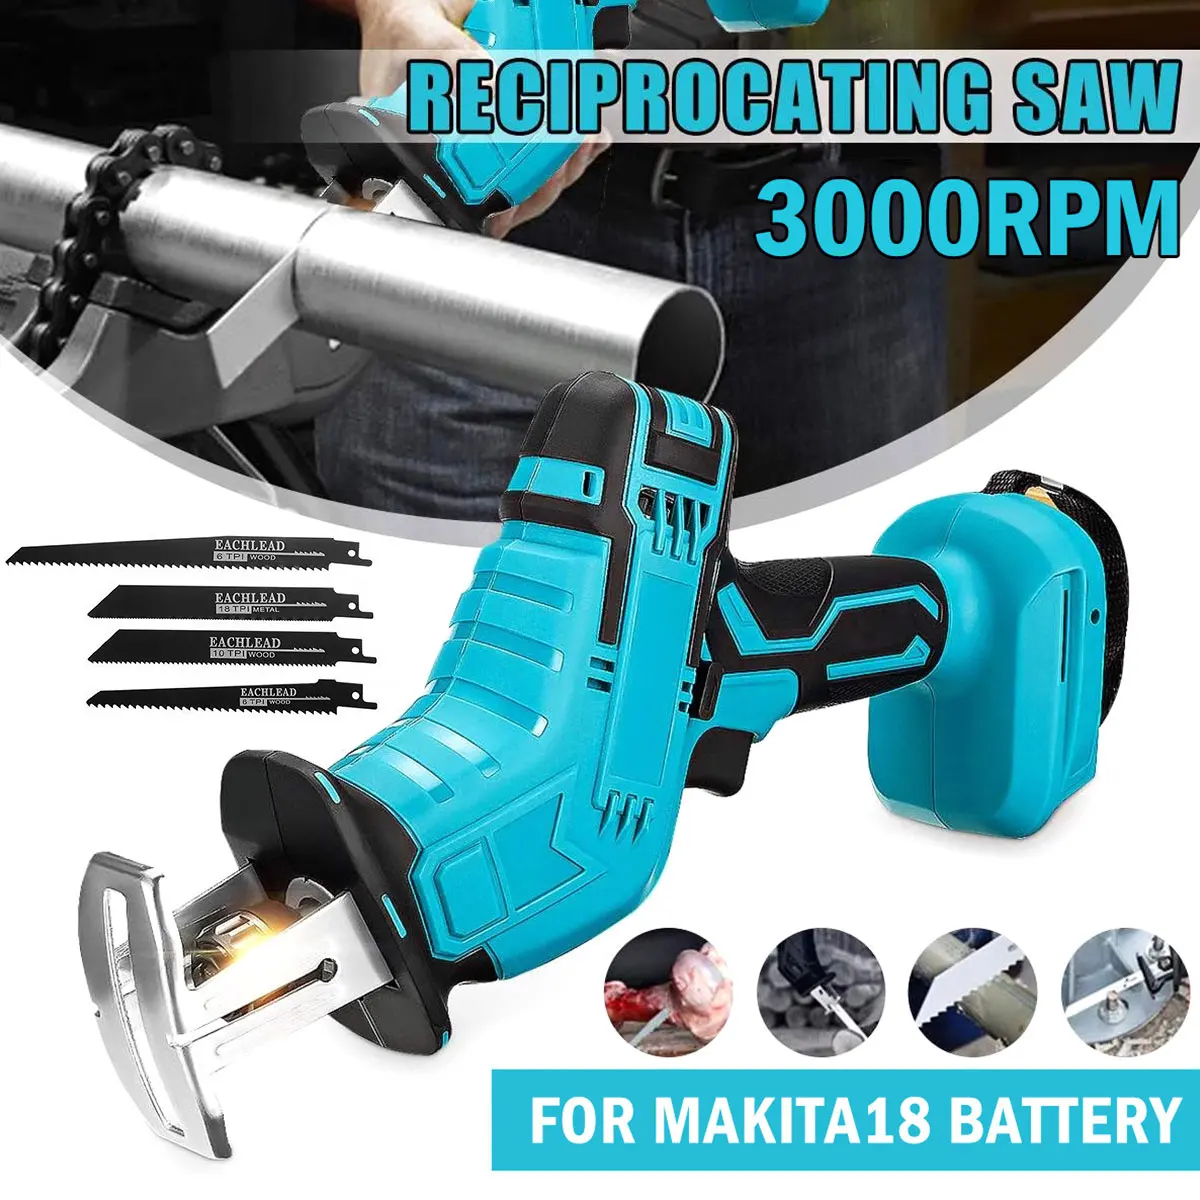 

Cordless Reciprocating Saw Electric Saw With LED Light 4 Blades 18V Portable Reciprocating Saw Kit Variable Speed Cutting Tool